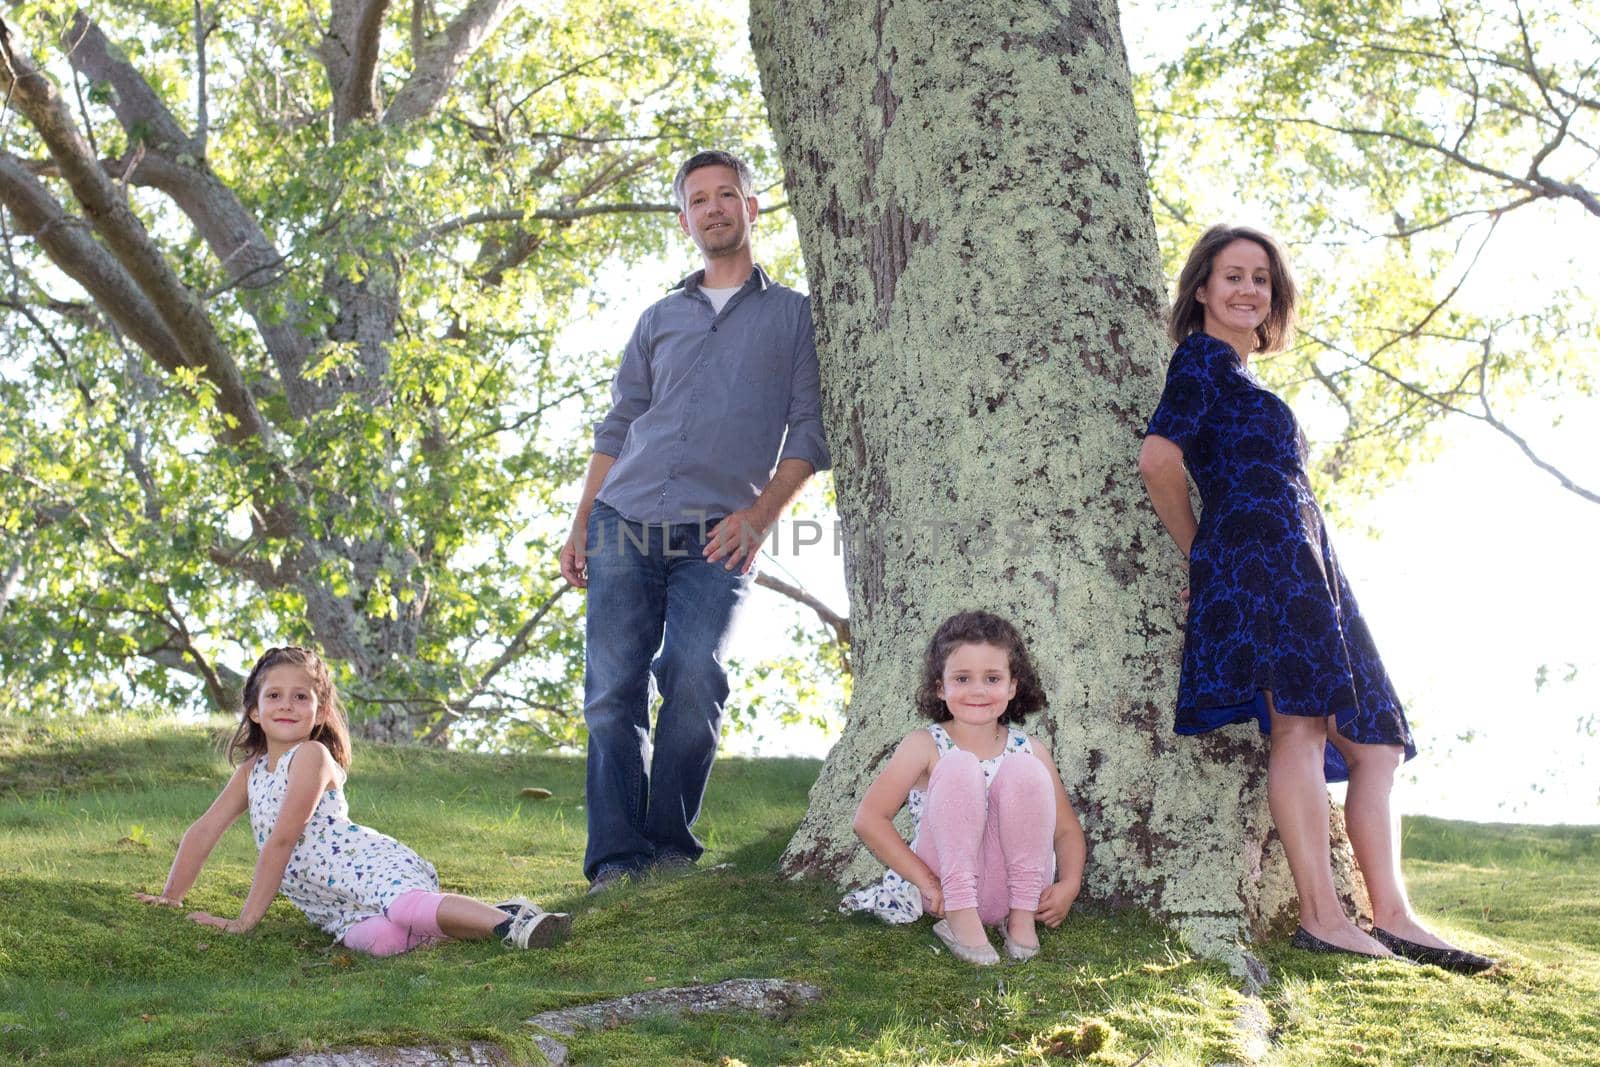 a mother, father and their two daughters casually hang out by a beautiful old tree outdoors smiling